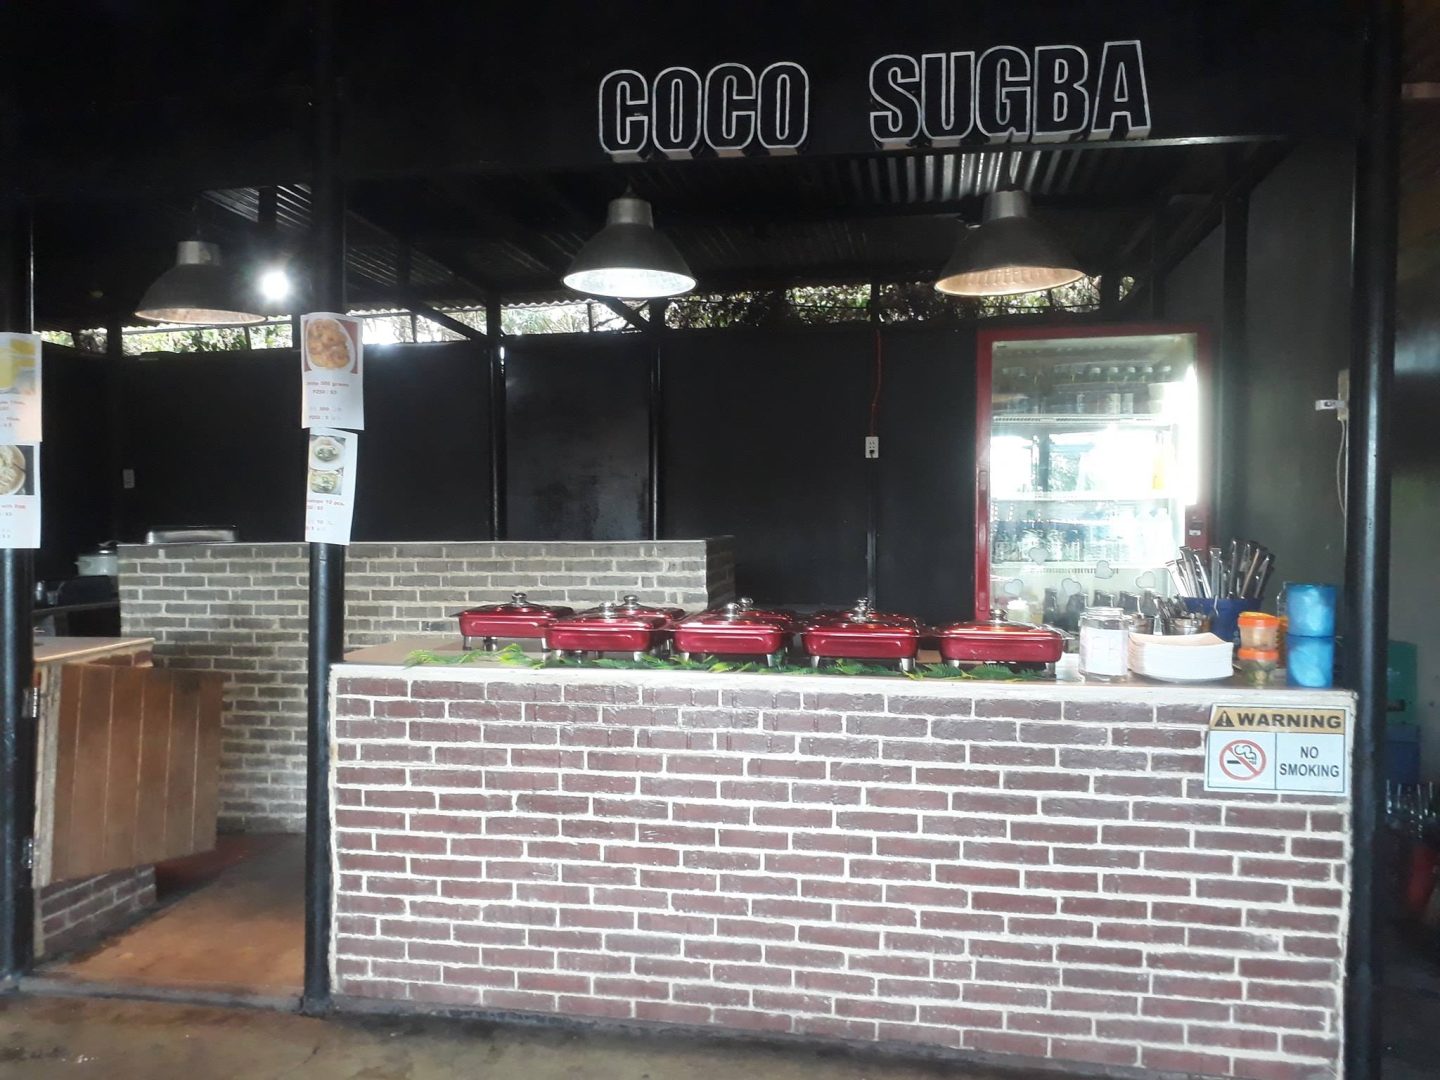 All you can eat Meat and Seafood at Coco Sugba